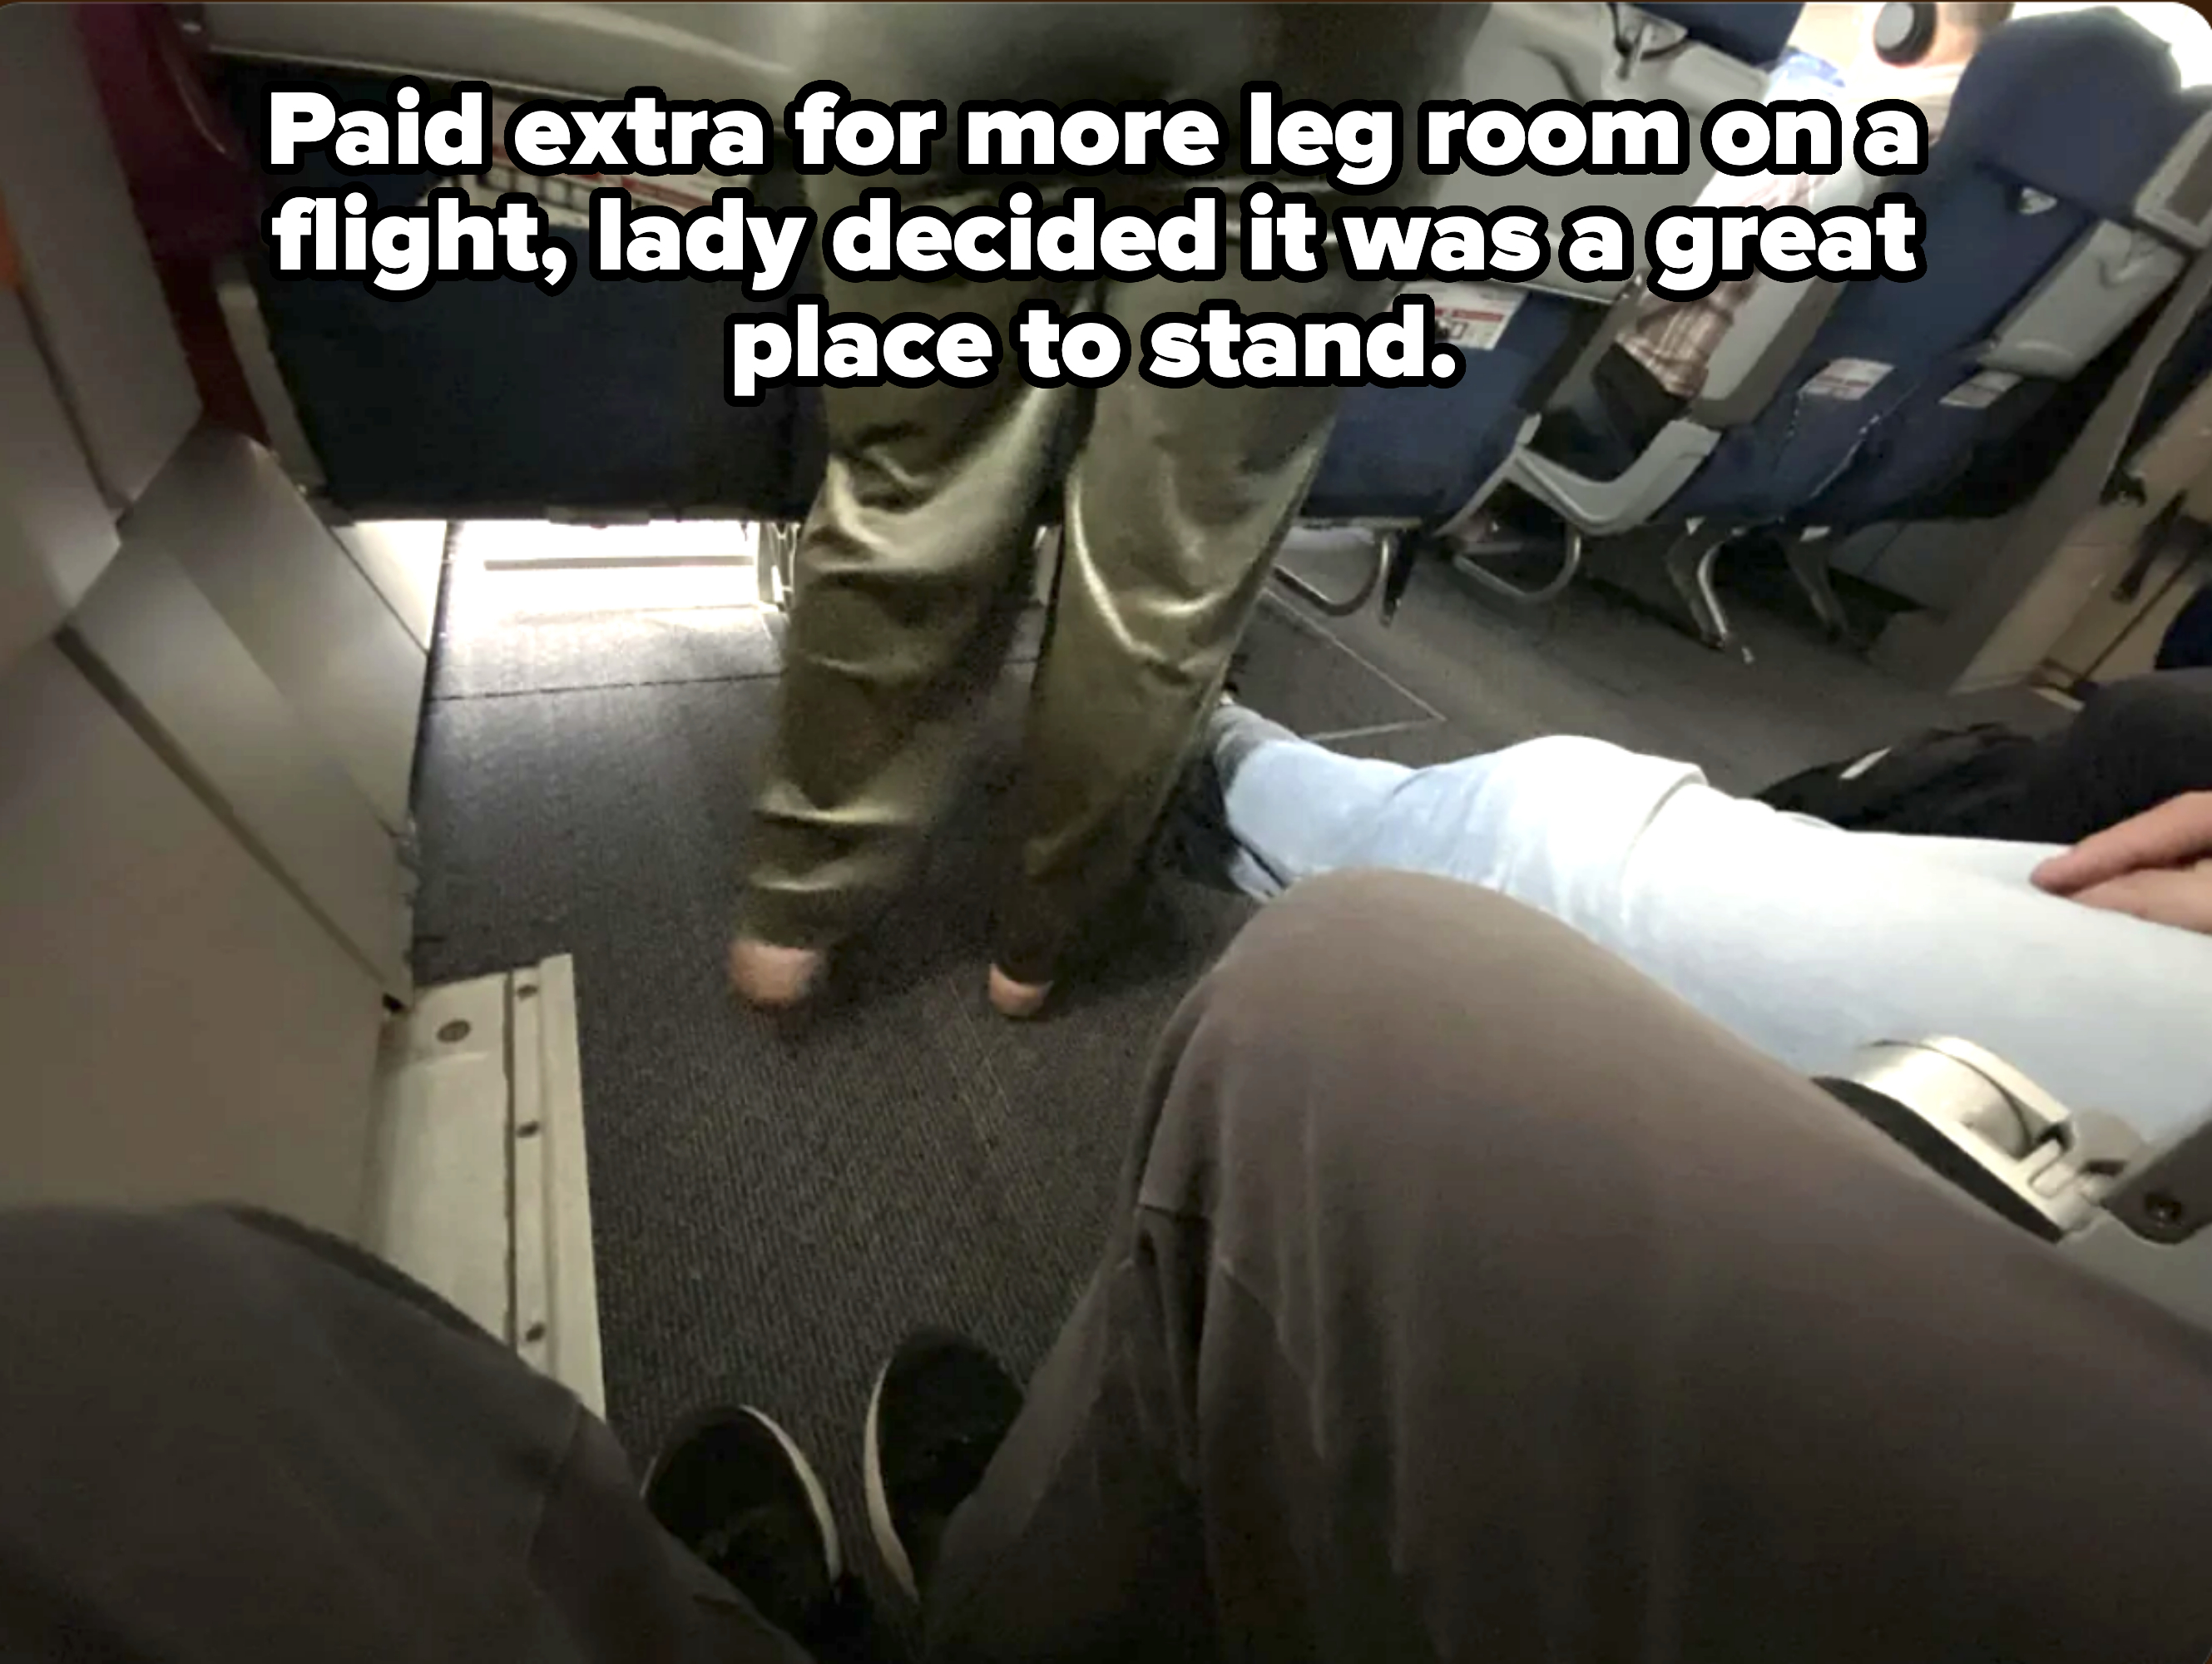 Passenger standing in airplane aisle next to seated passengers&#x27; legs, perspective from sitting down